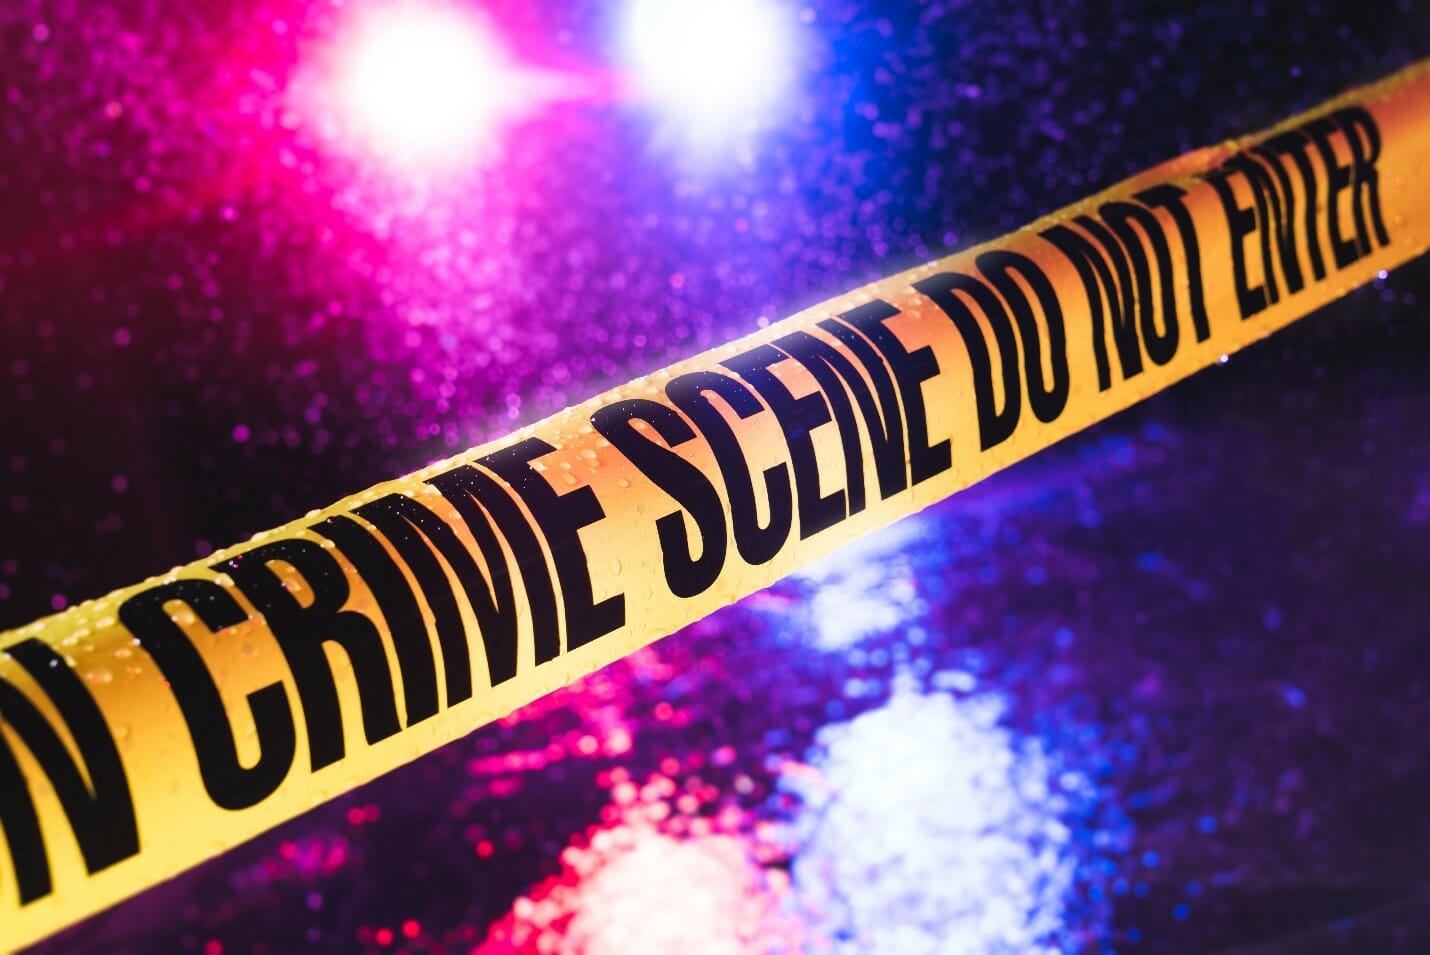 How to be prepared if your business falls victim to a crime